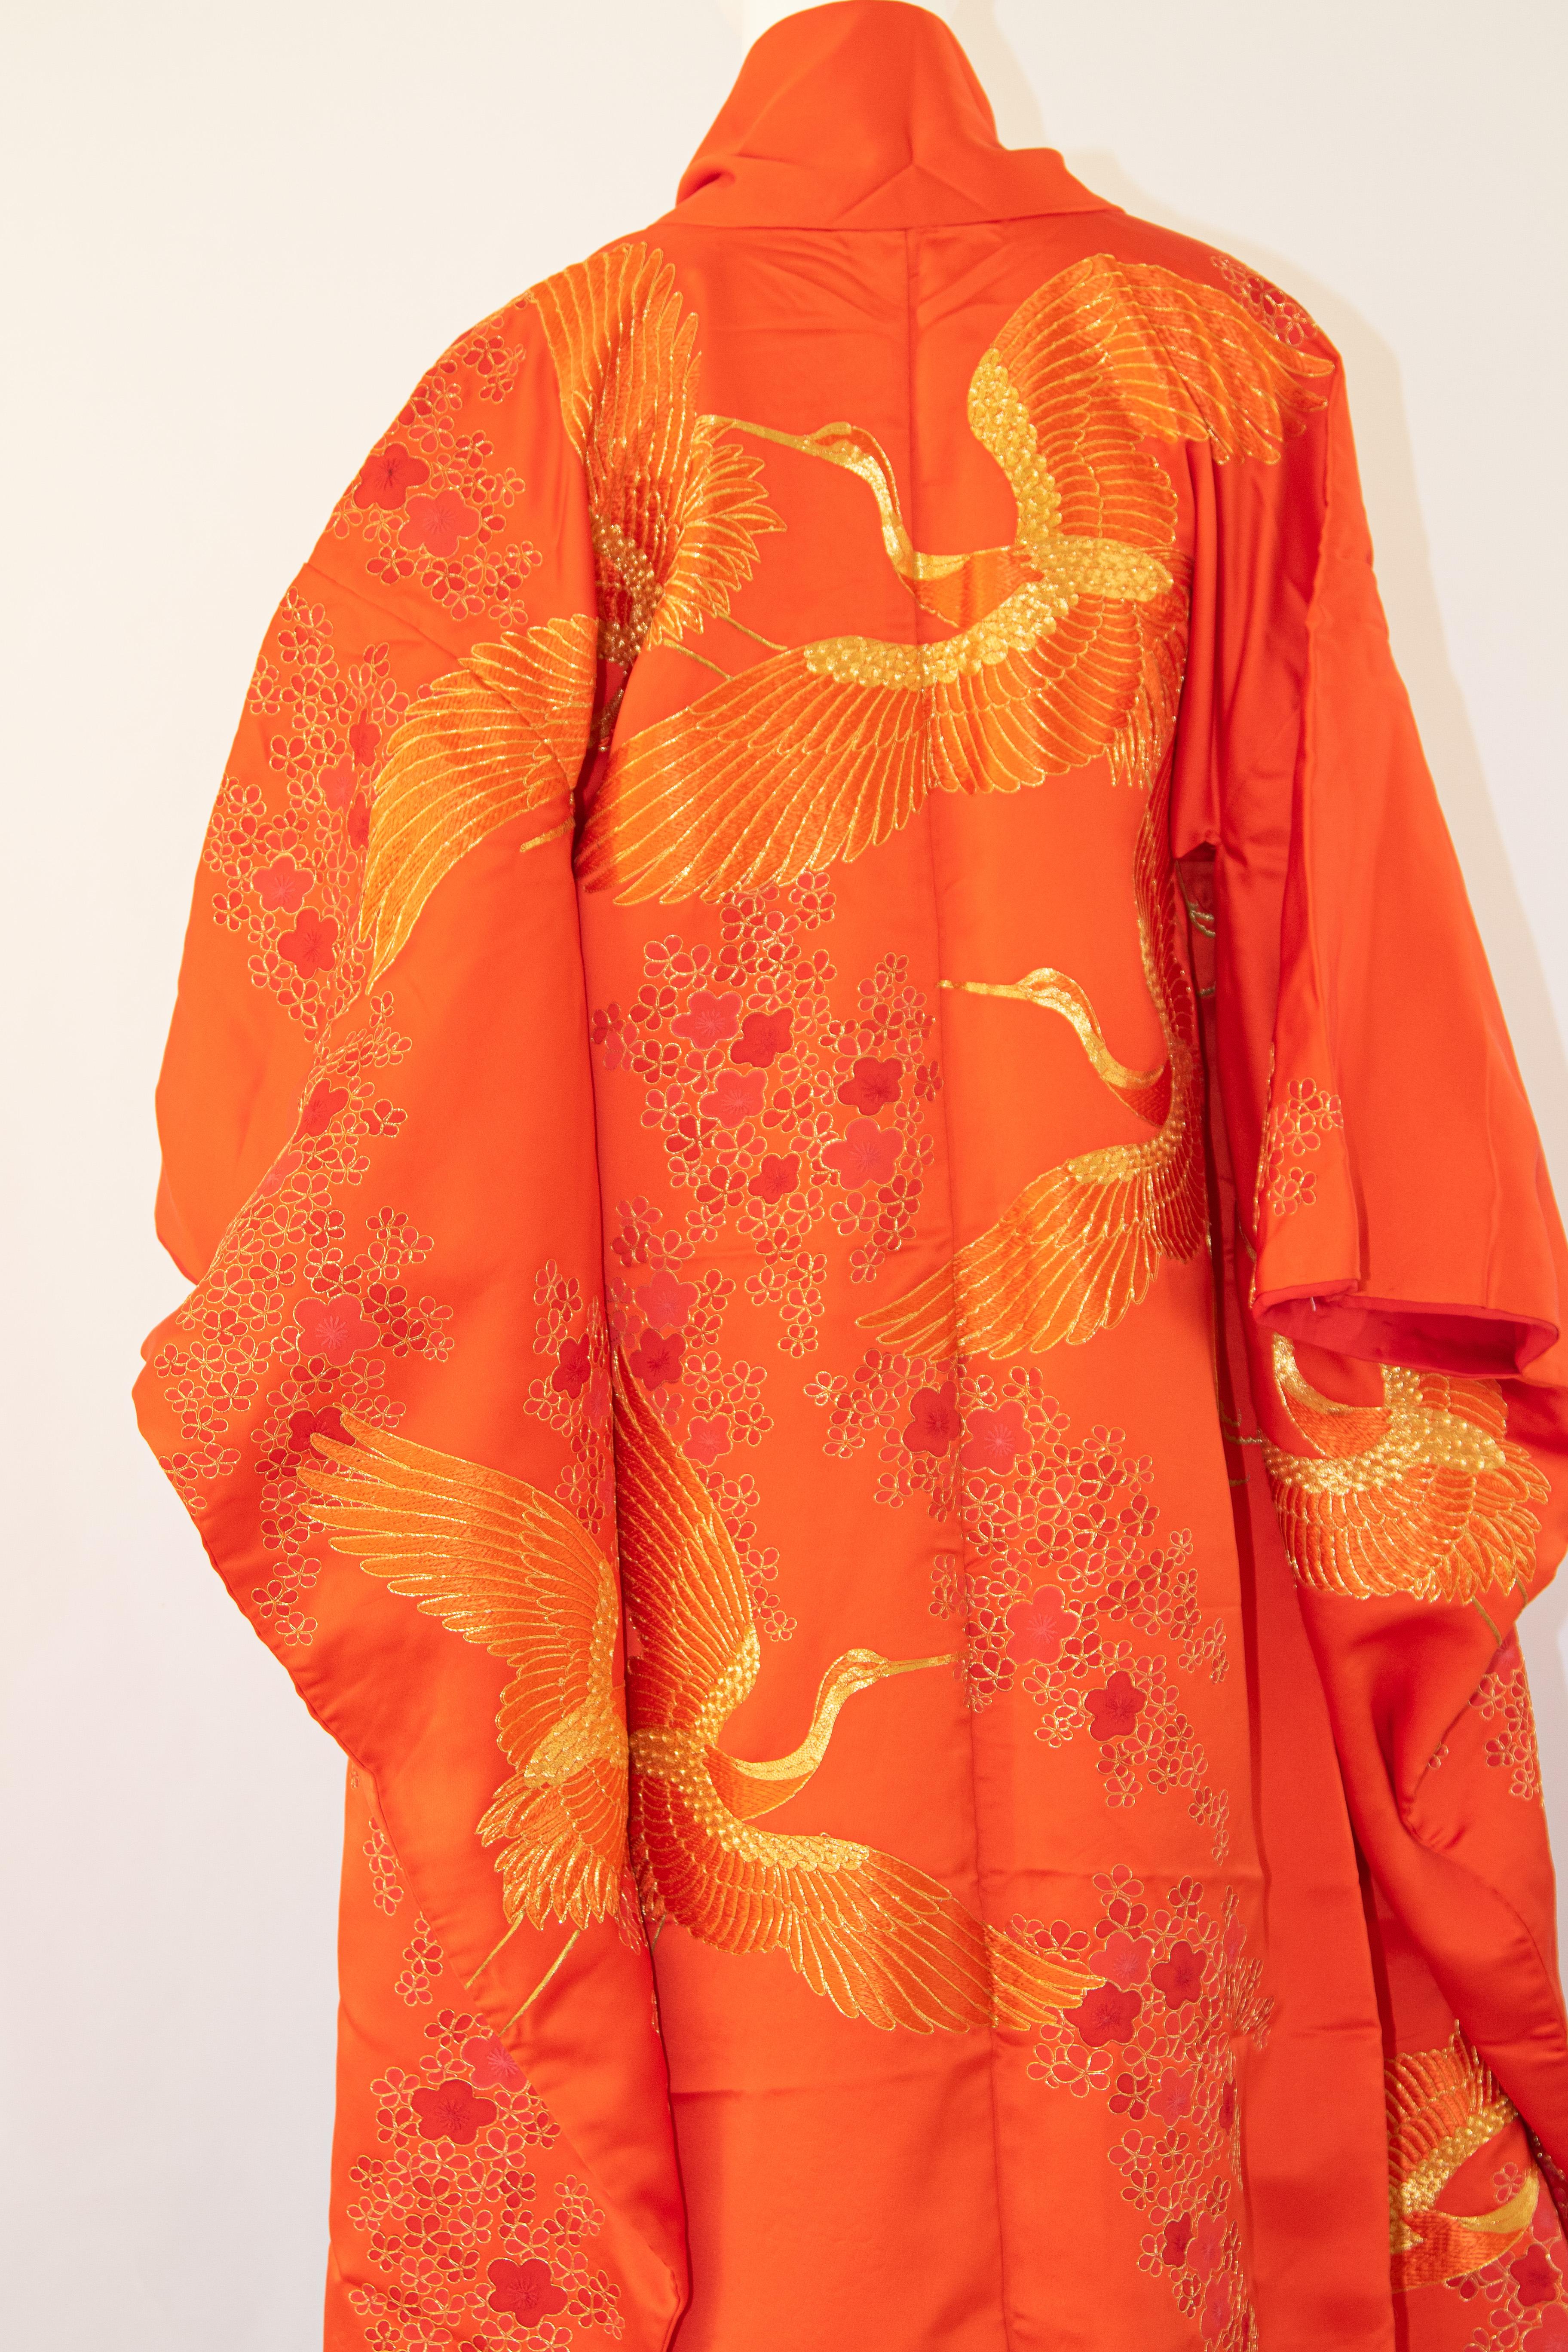 A vintage midcentury red silk brocade collectable Japanese ceremonial wedding kimono.
One of a kind handcrafted fabulous museum quality ceremonial piece in pure silk with intricate detailed hand-embroidery throughout accented with gold threads work 